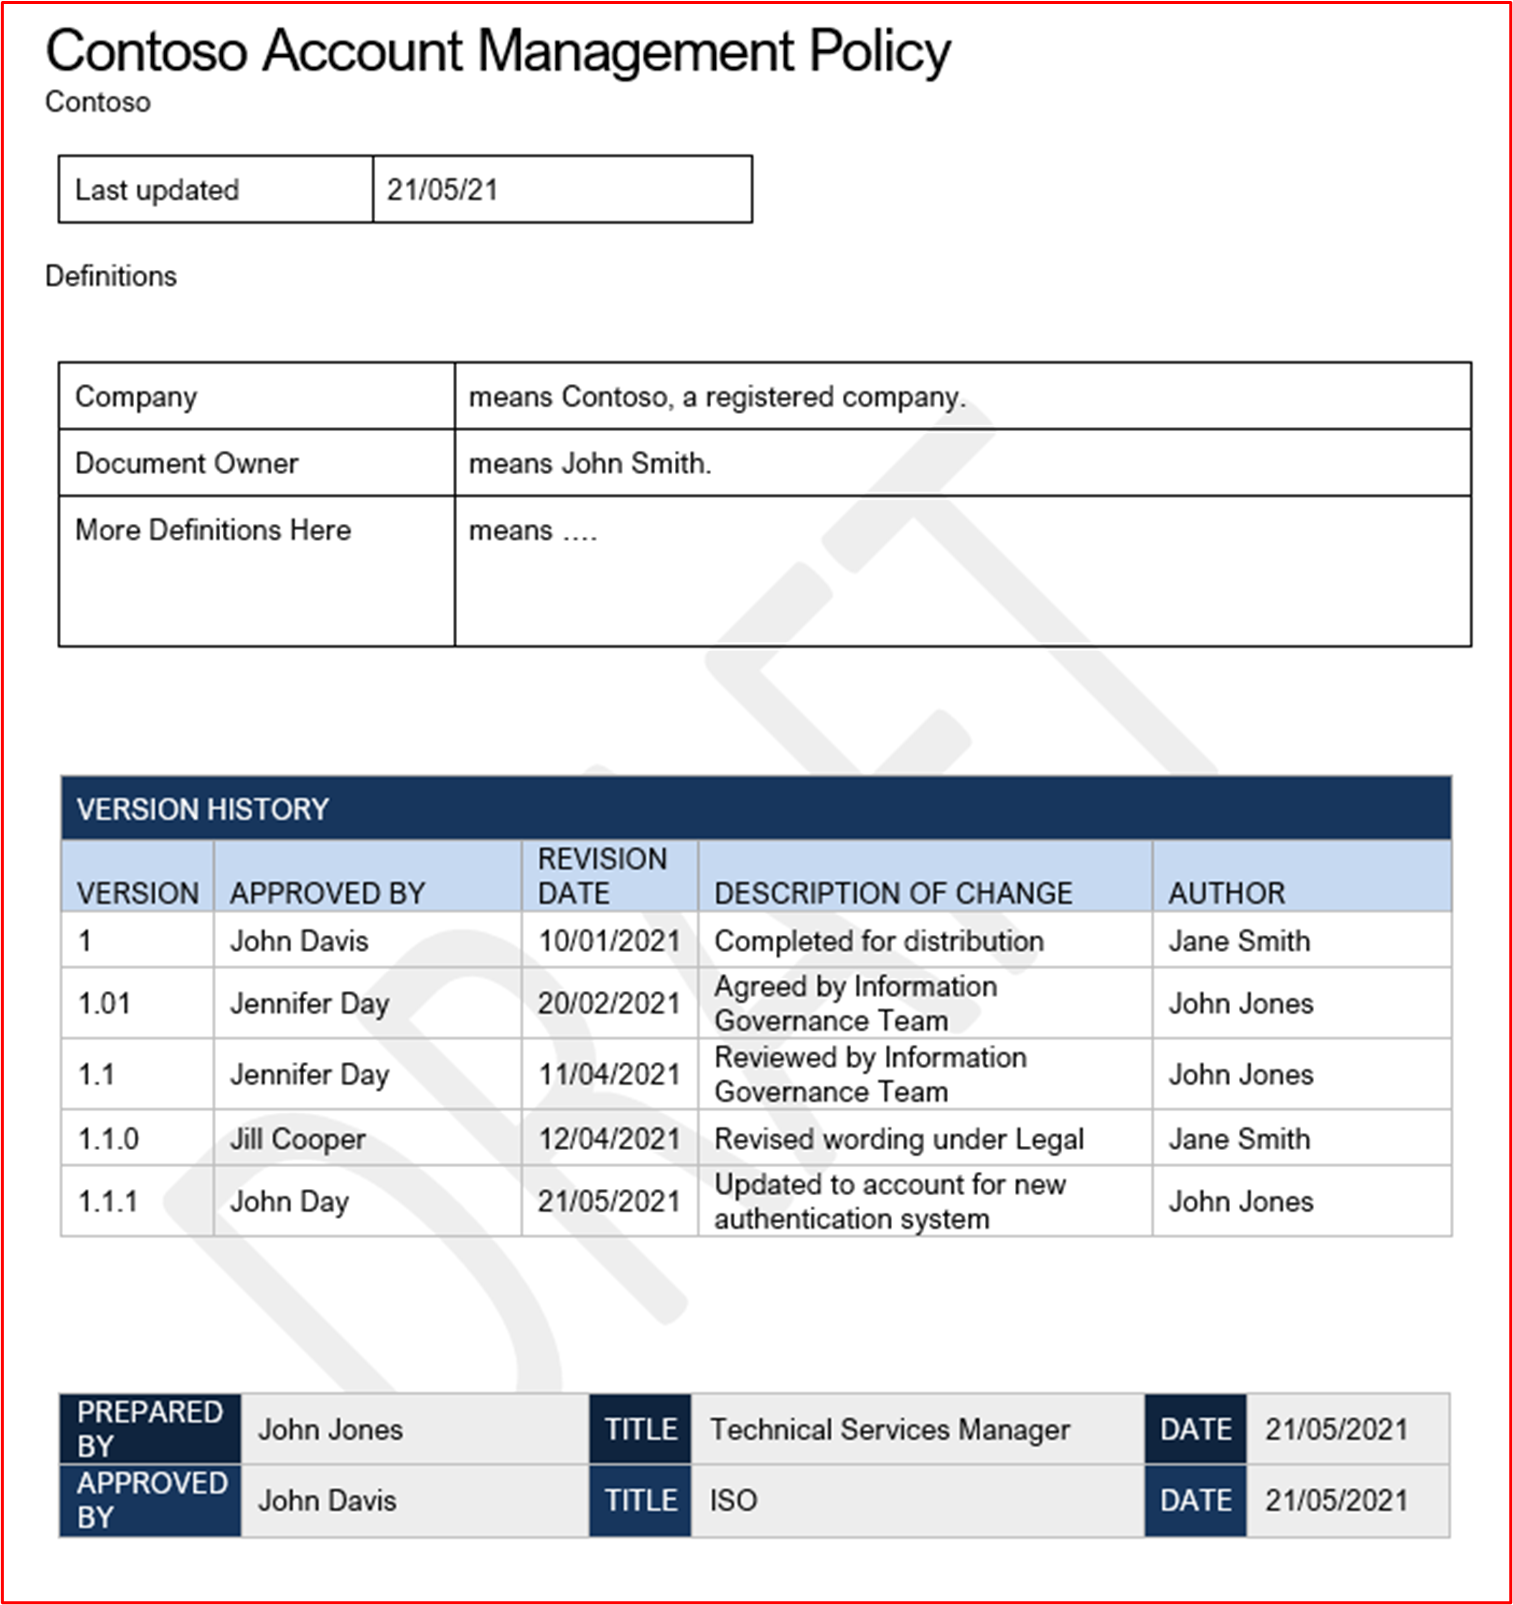 screenshot shows an example Account Management Policy for Contoso.